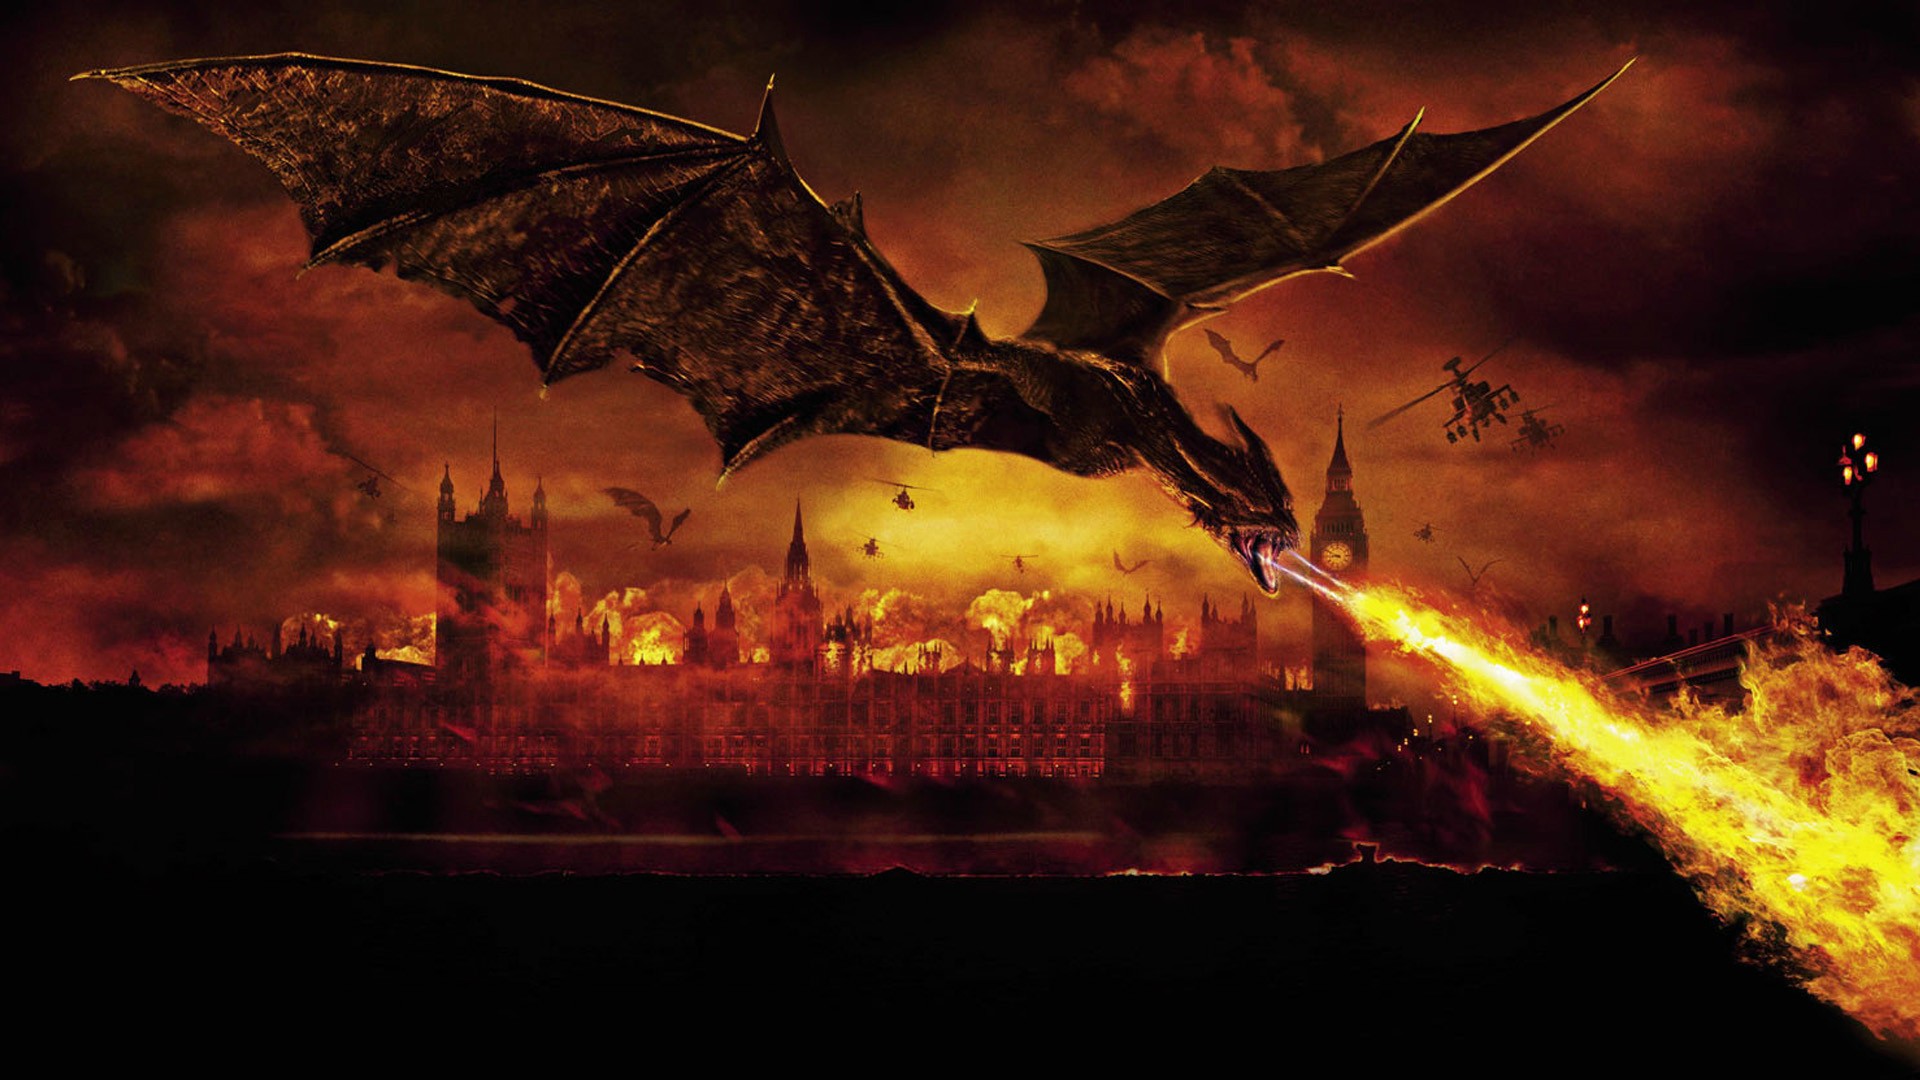 HD wallpaper depicting a dragon breathing fire over London, inspired by the movie Reign of Fire, showcasing a fiery apocalypse at a palace.